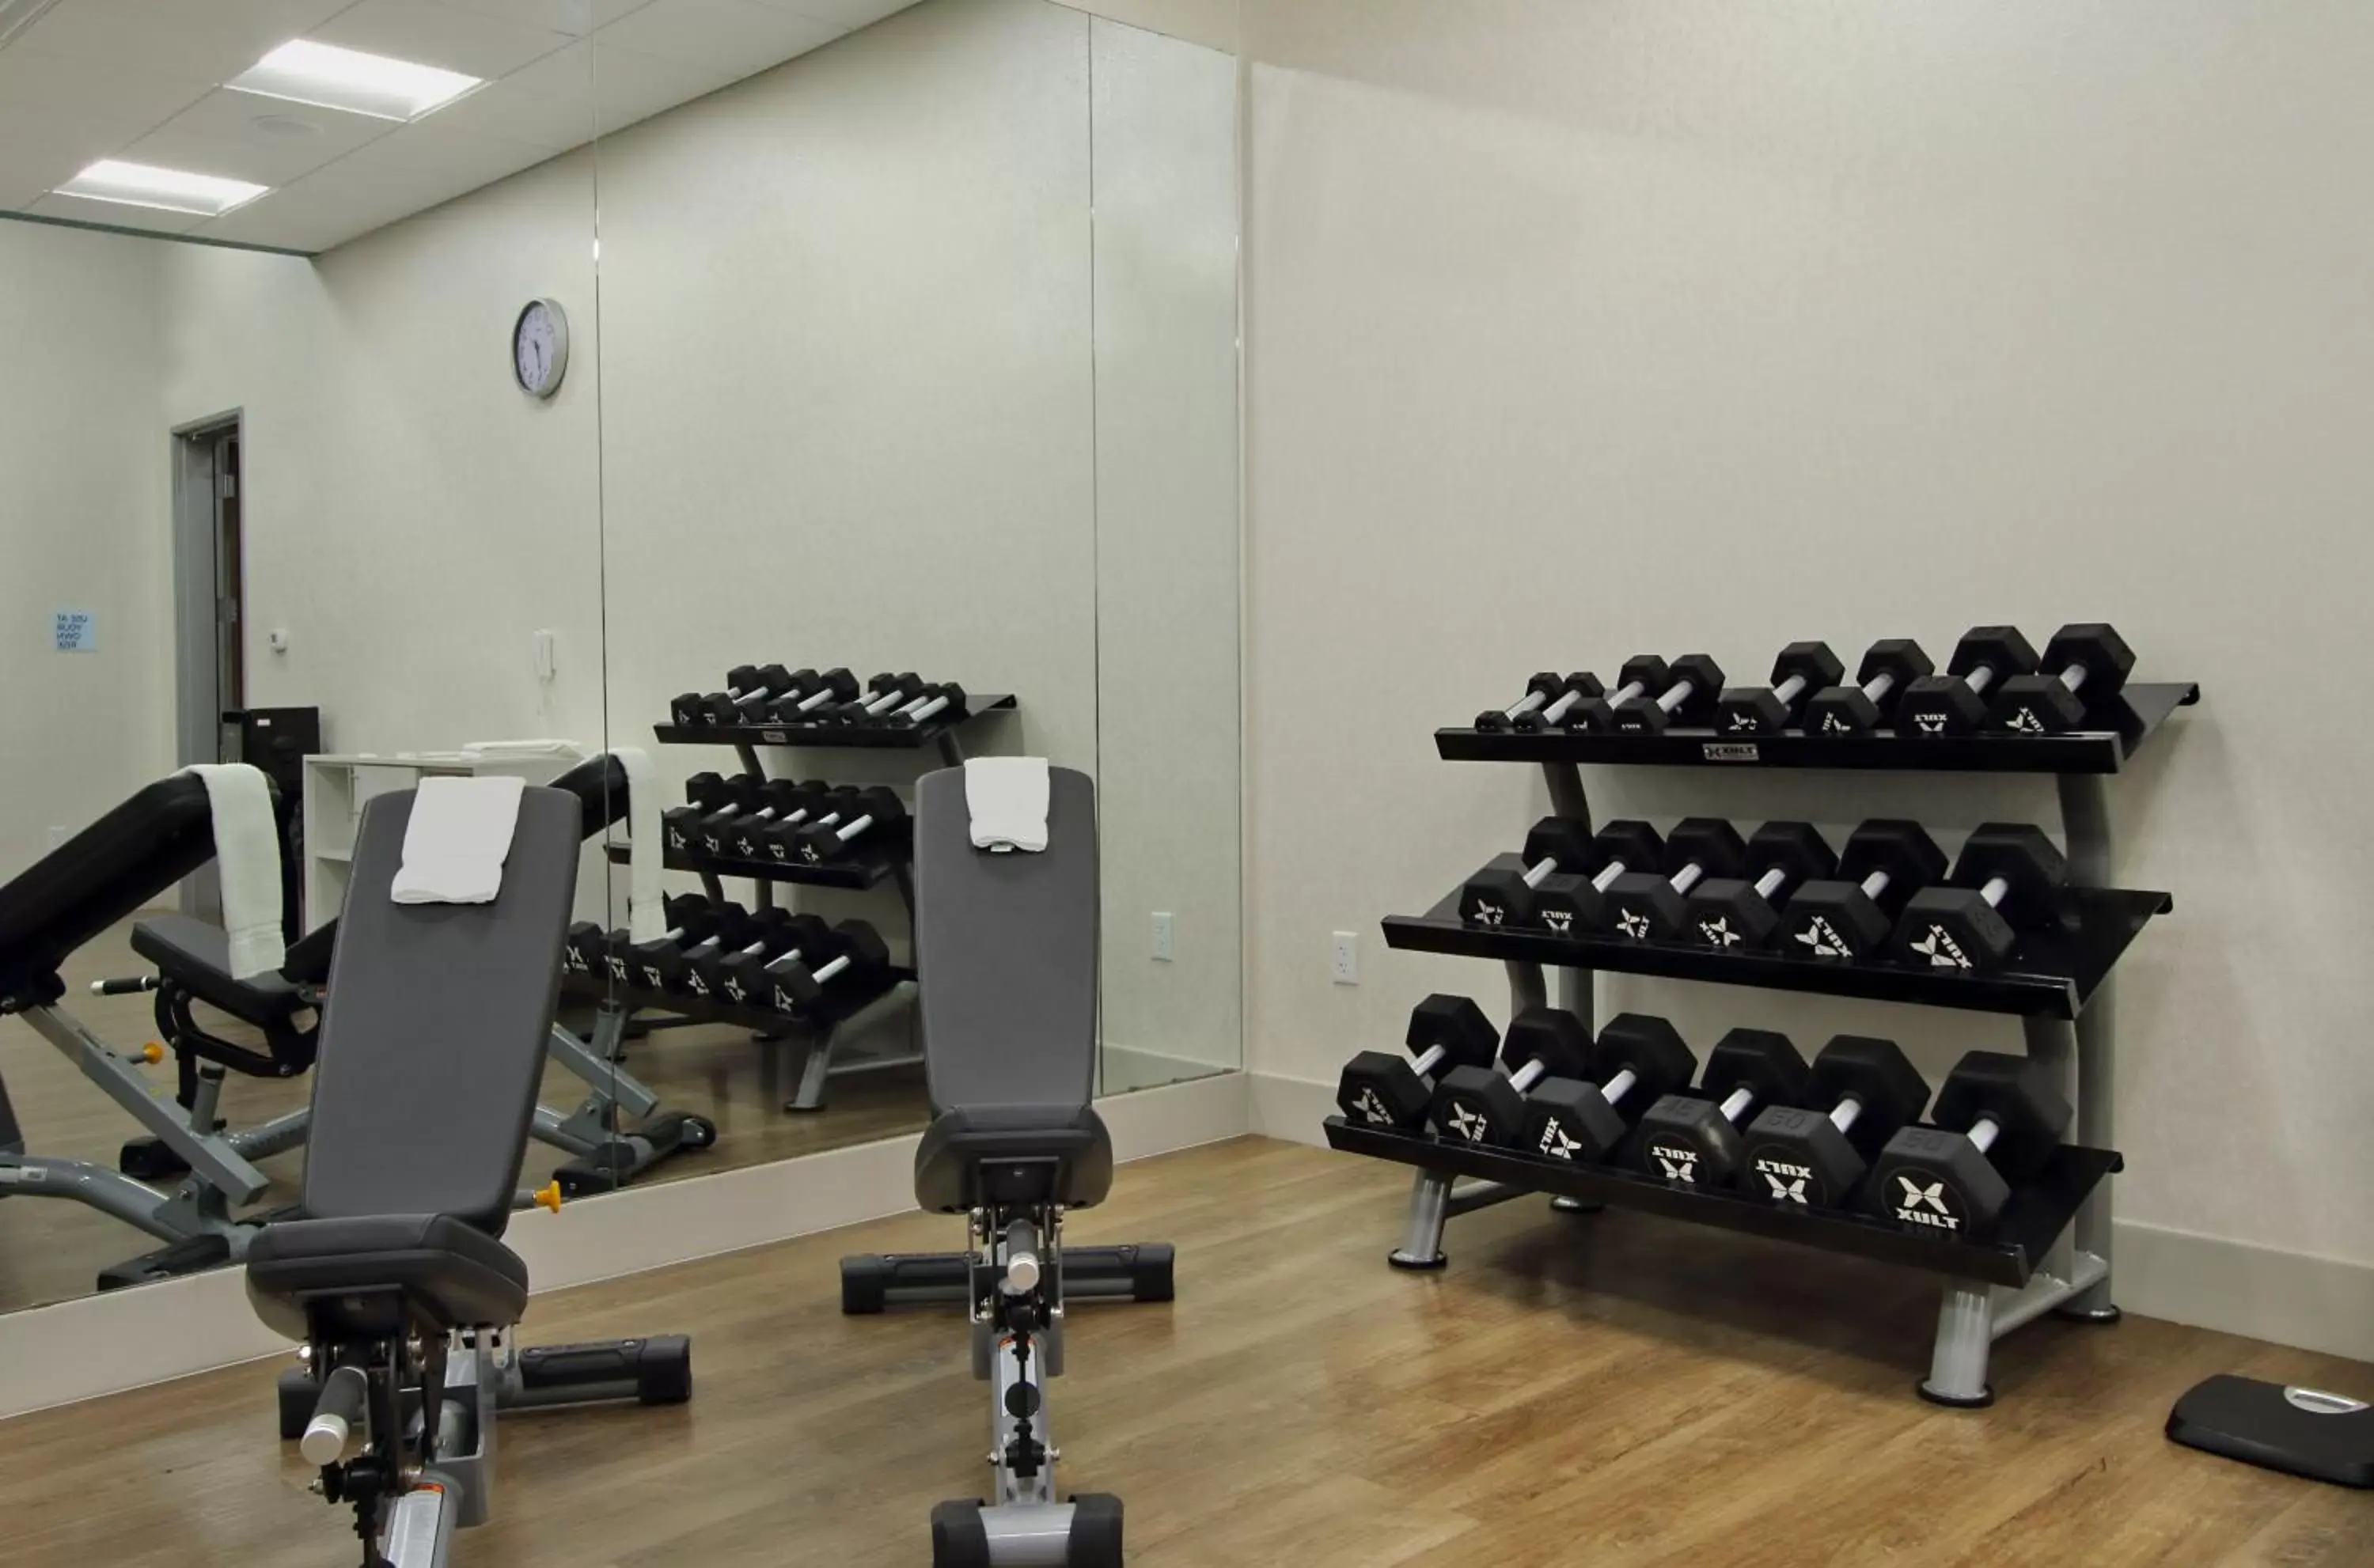 Fitness centre/facilities, Fitness Center/Facilities in Holiday Inn Express & Suites - Frisco NW Toyota Stdm, an IHG Hotel